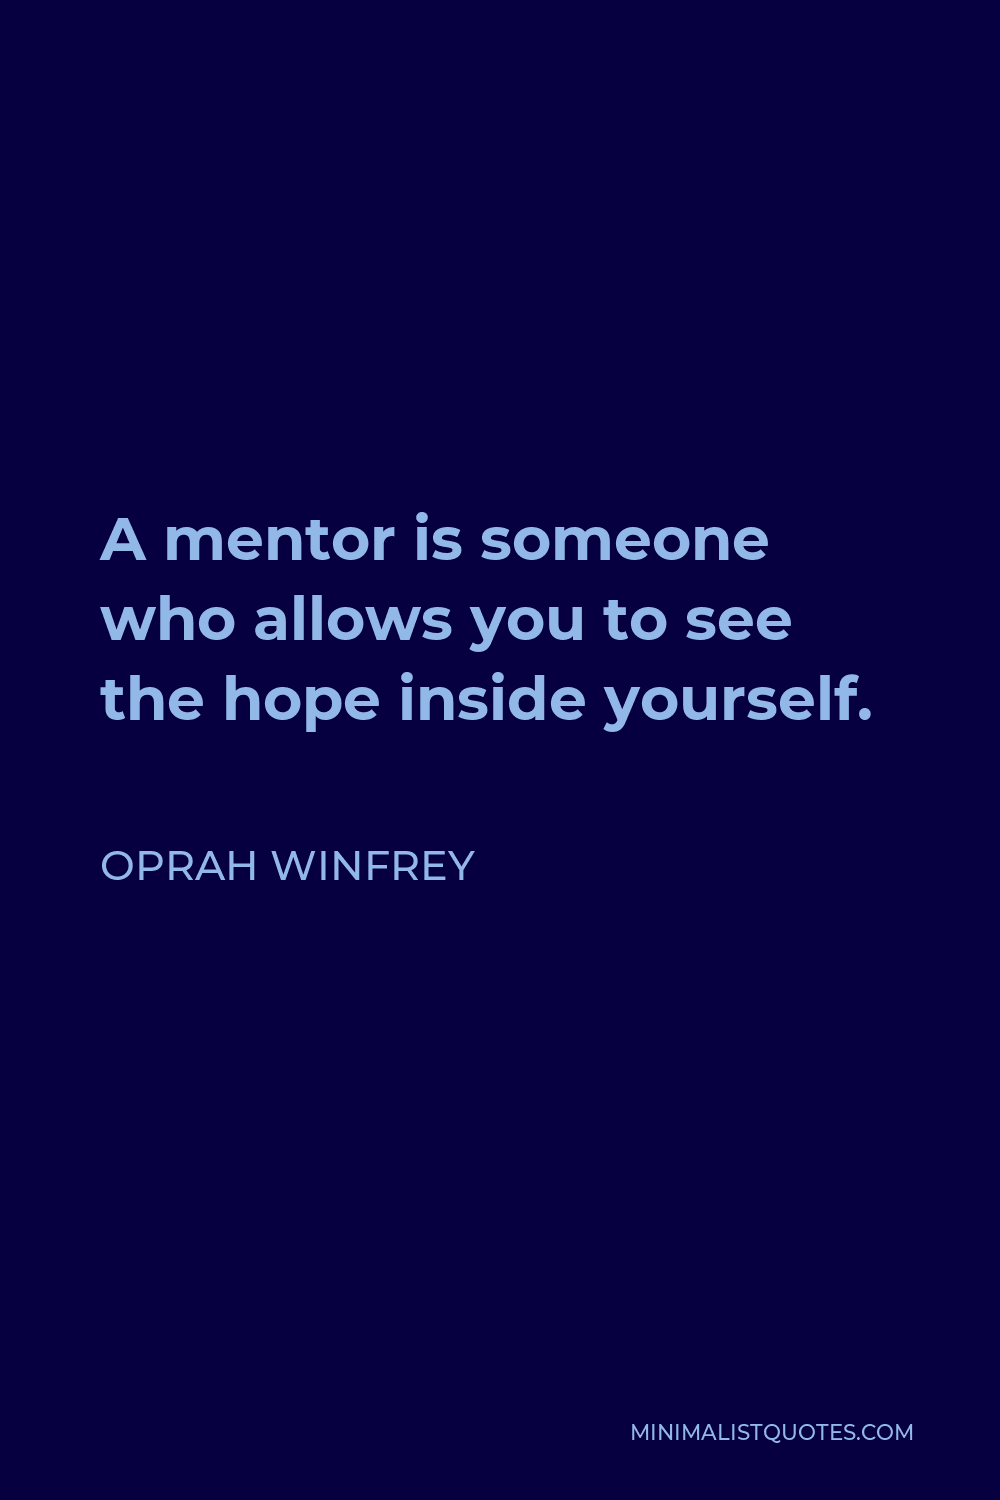 Oprah Winfrey Quote - A mentor is someone who allows you to see the hope inside yourself.